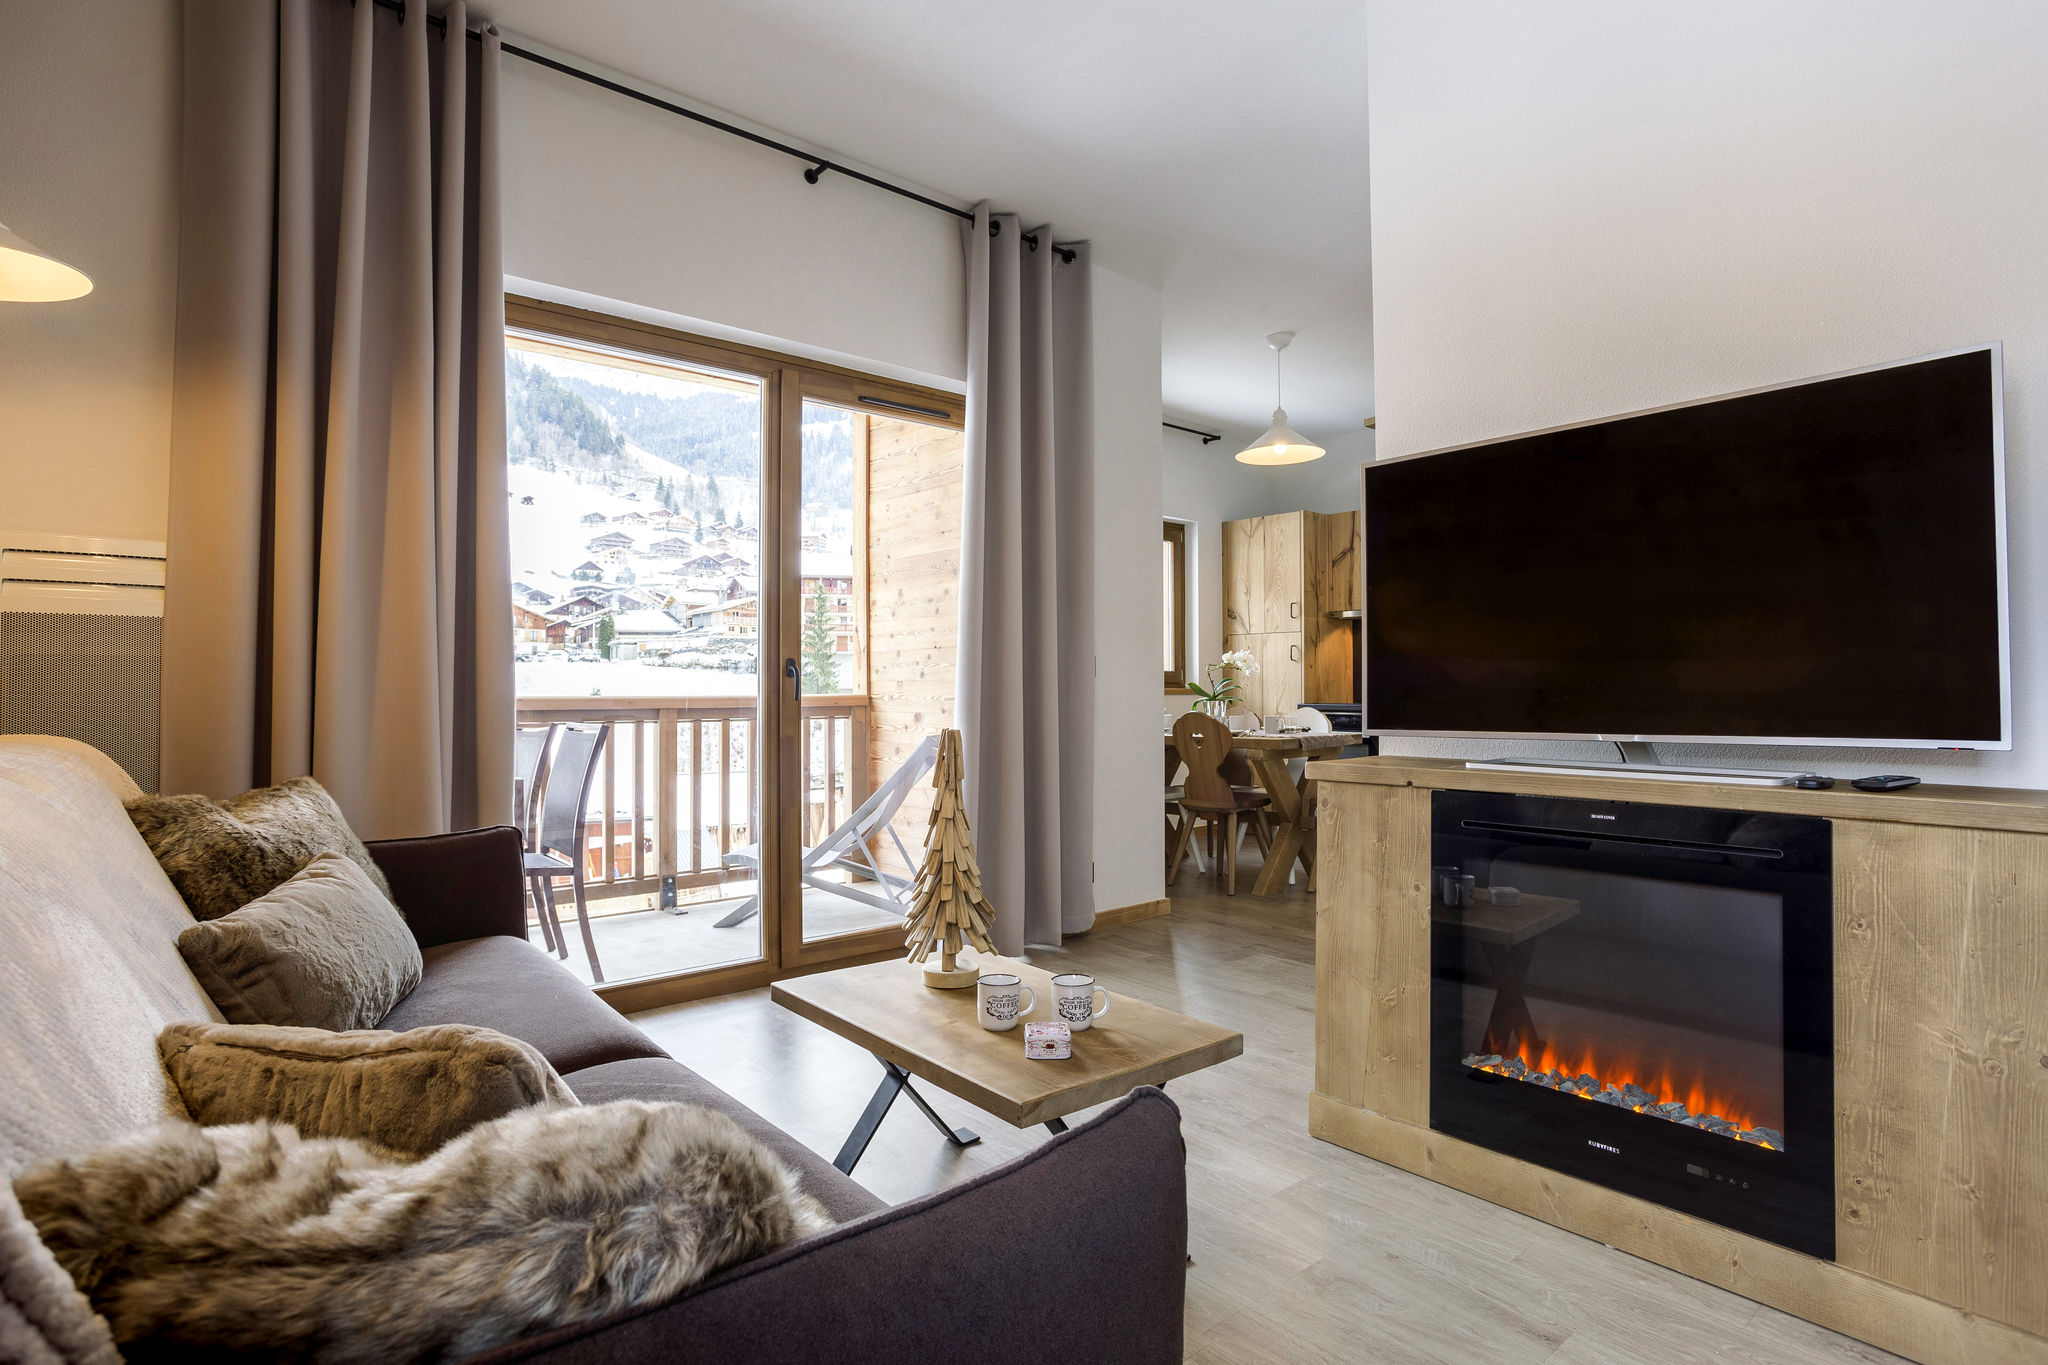 Cozy apartment 300 m from the ski lift in a mountain village